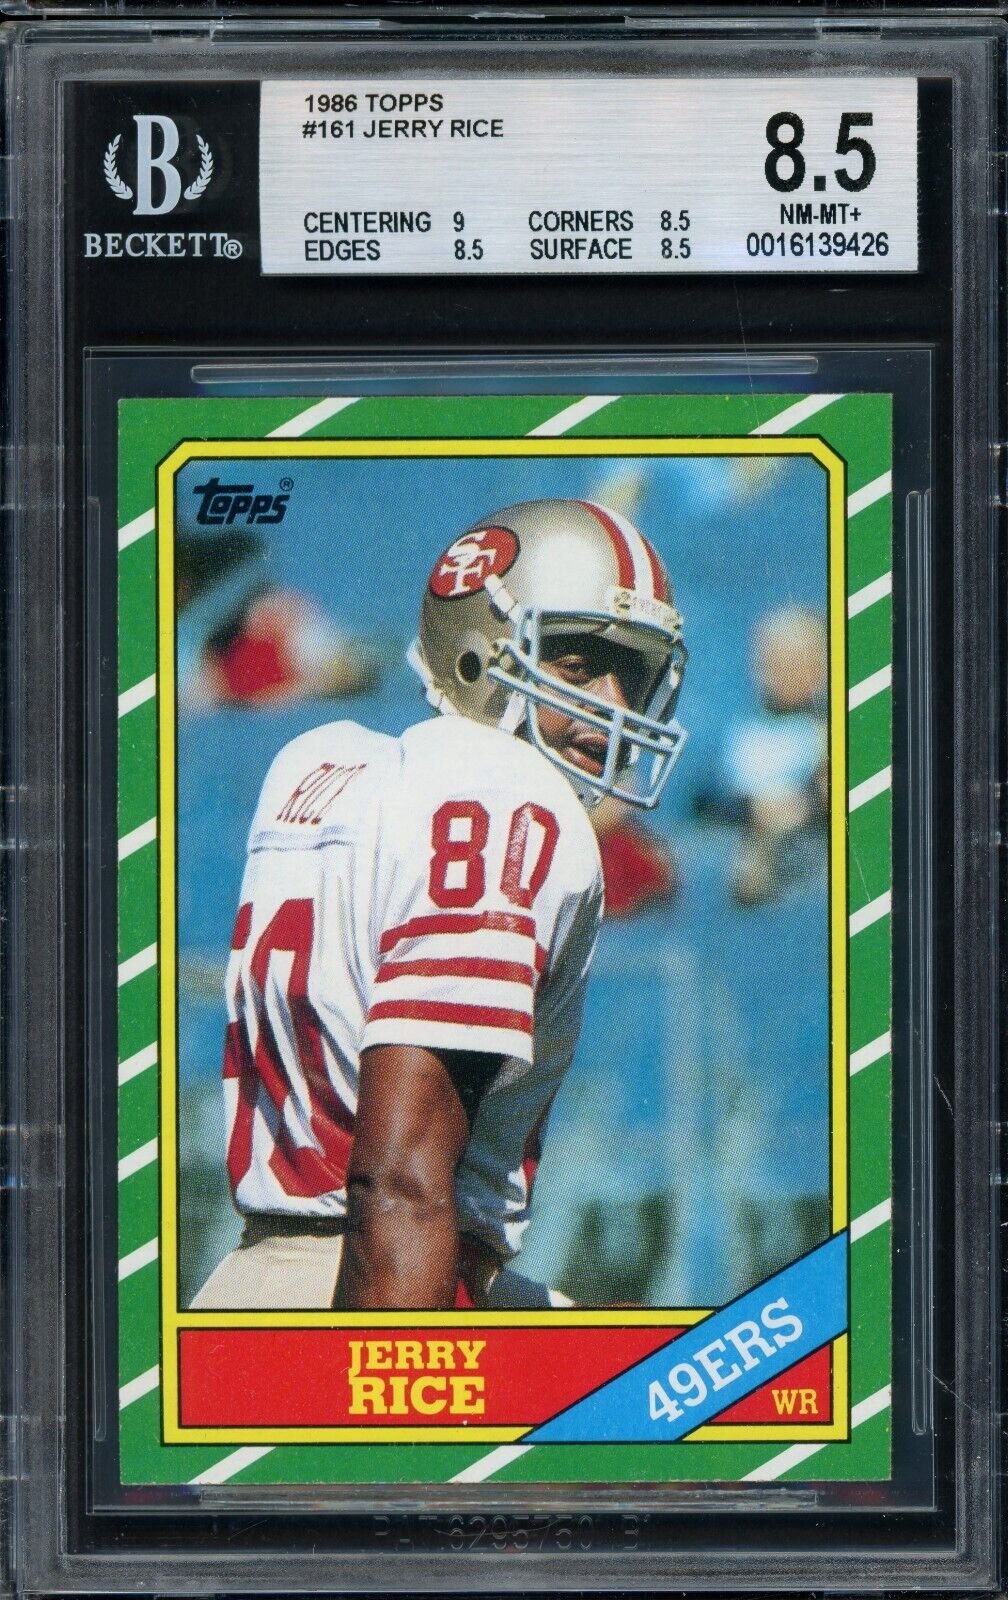 1986 Jerry Rice Topps #161 RC Rookie BGS 8.5 (9/8.5/8.5/8.5) **CENTERED**